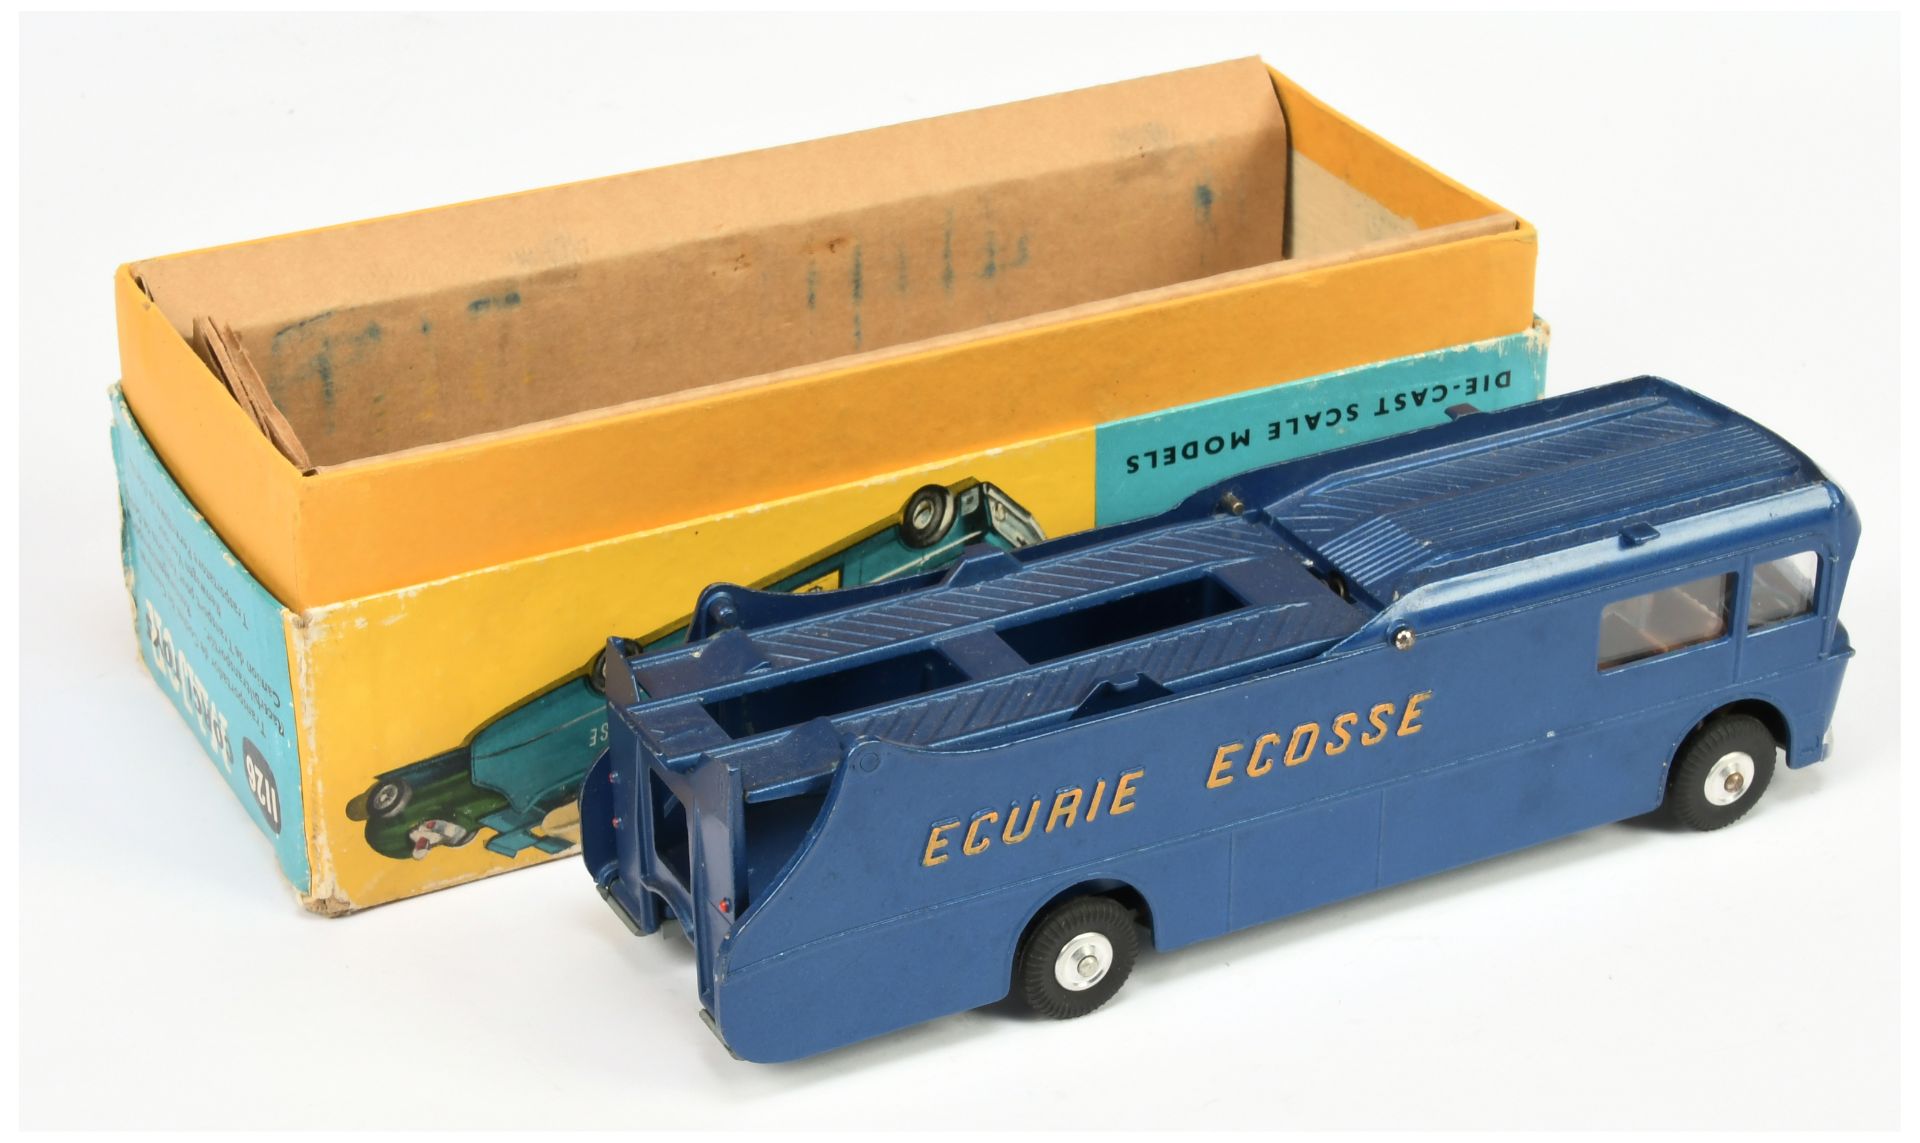 Corgi Toys 1126 Ecurie Ecosse Racing Car Transporter - Blue body with yellow lettering, brown int... - Bild 2 aus 2